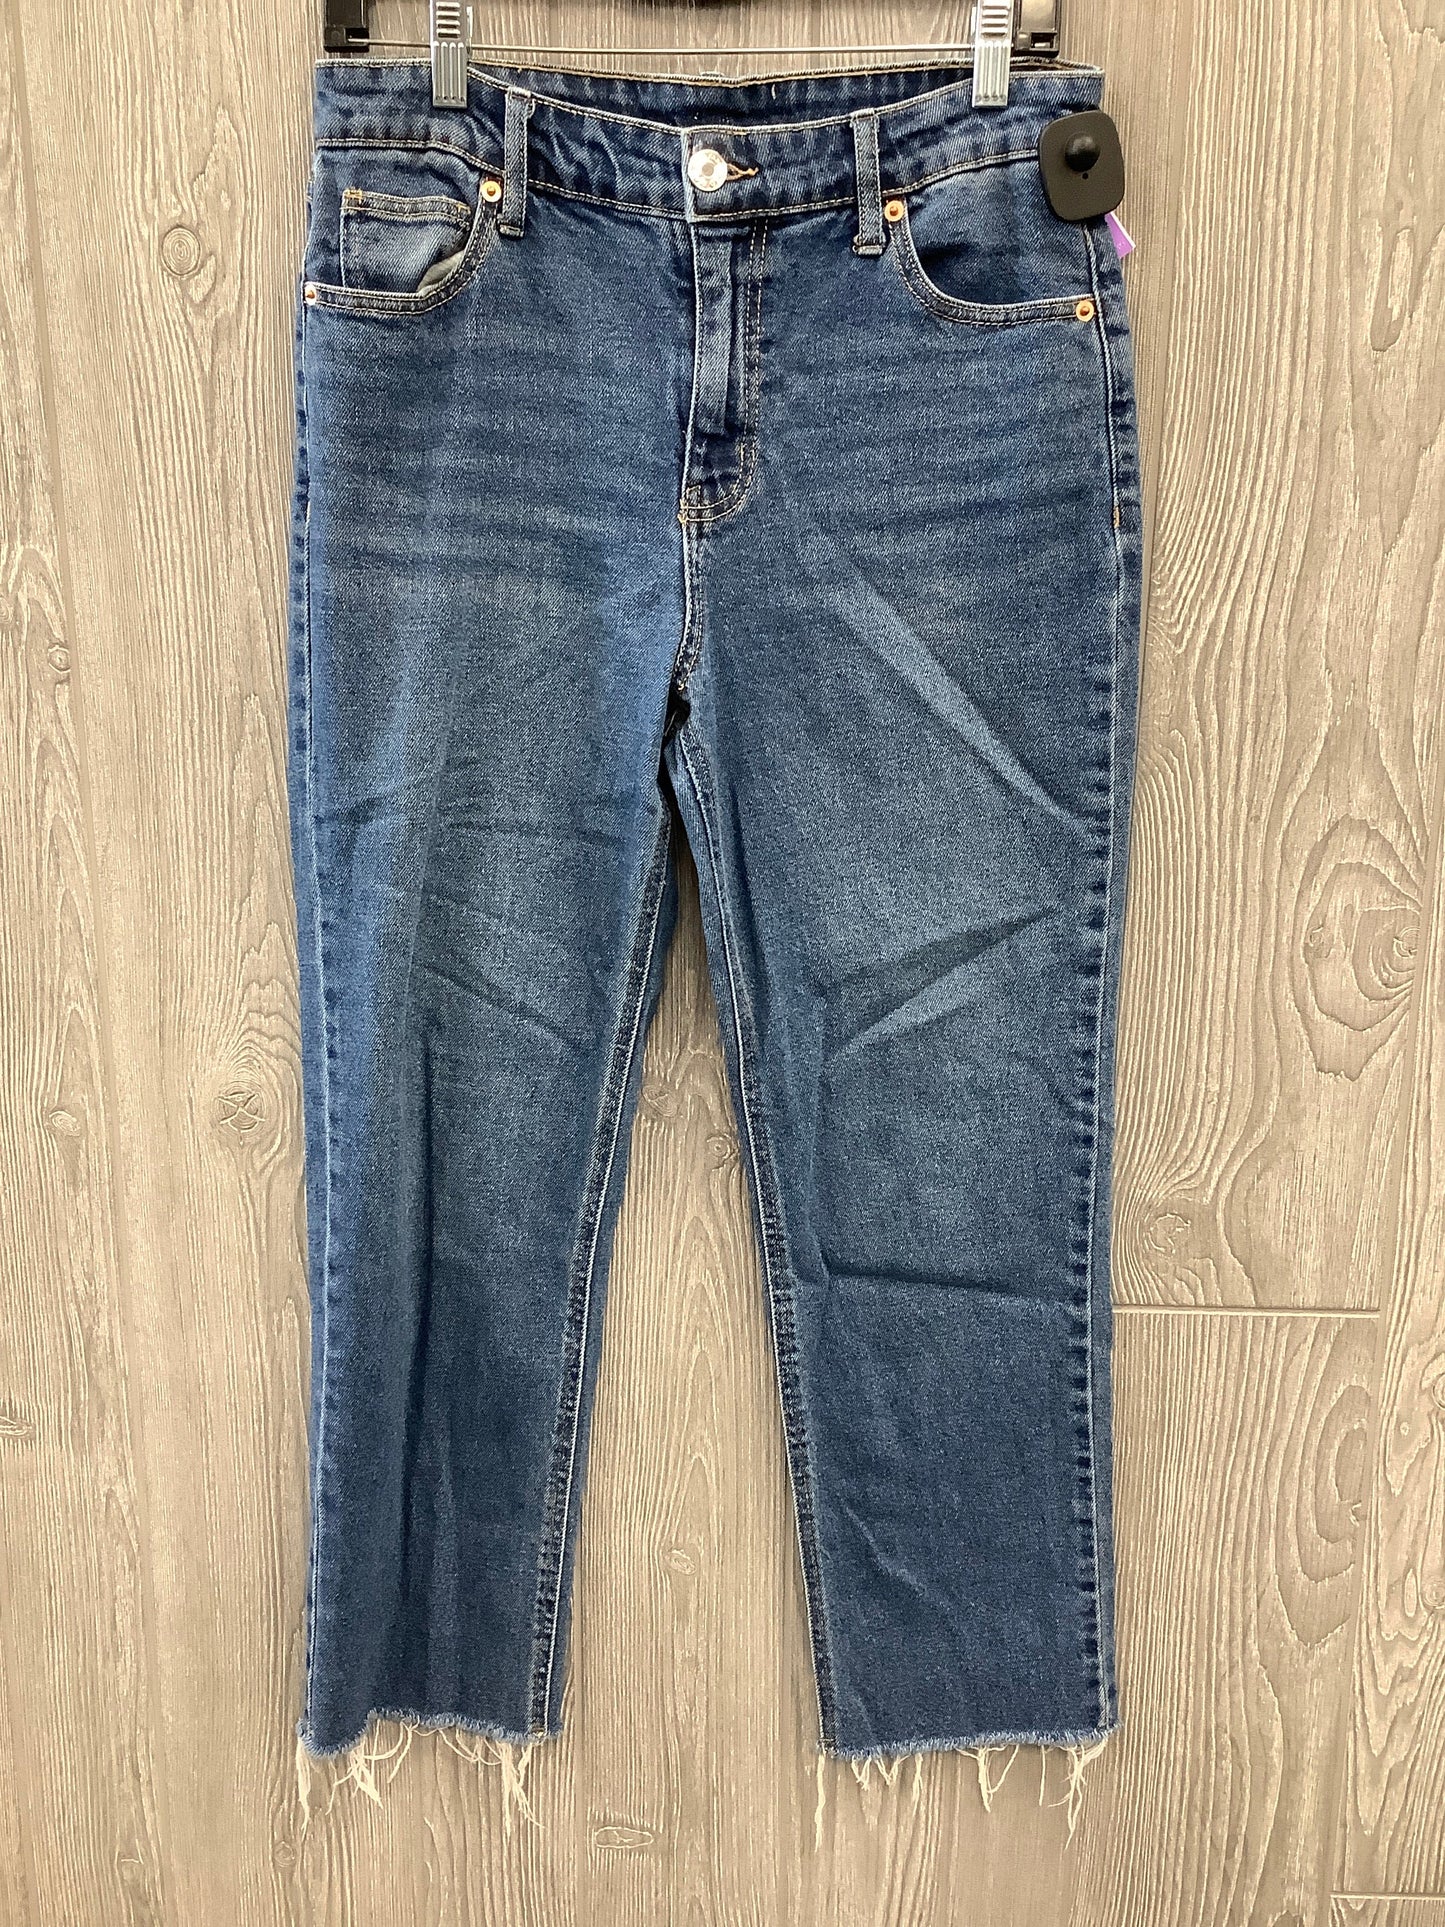 Blue Denim Jeans Cropped Wild Fable, Size 8